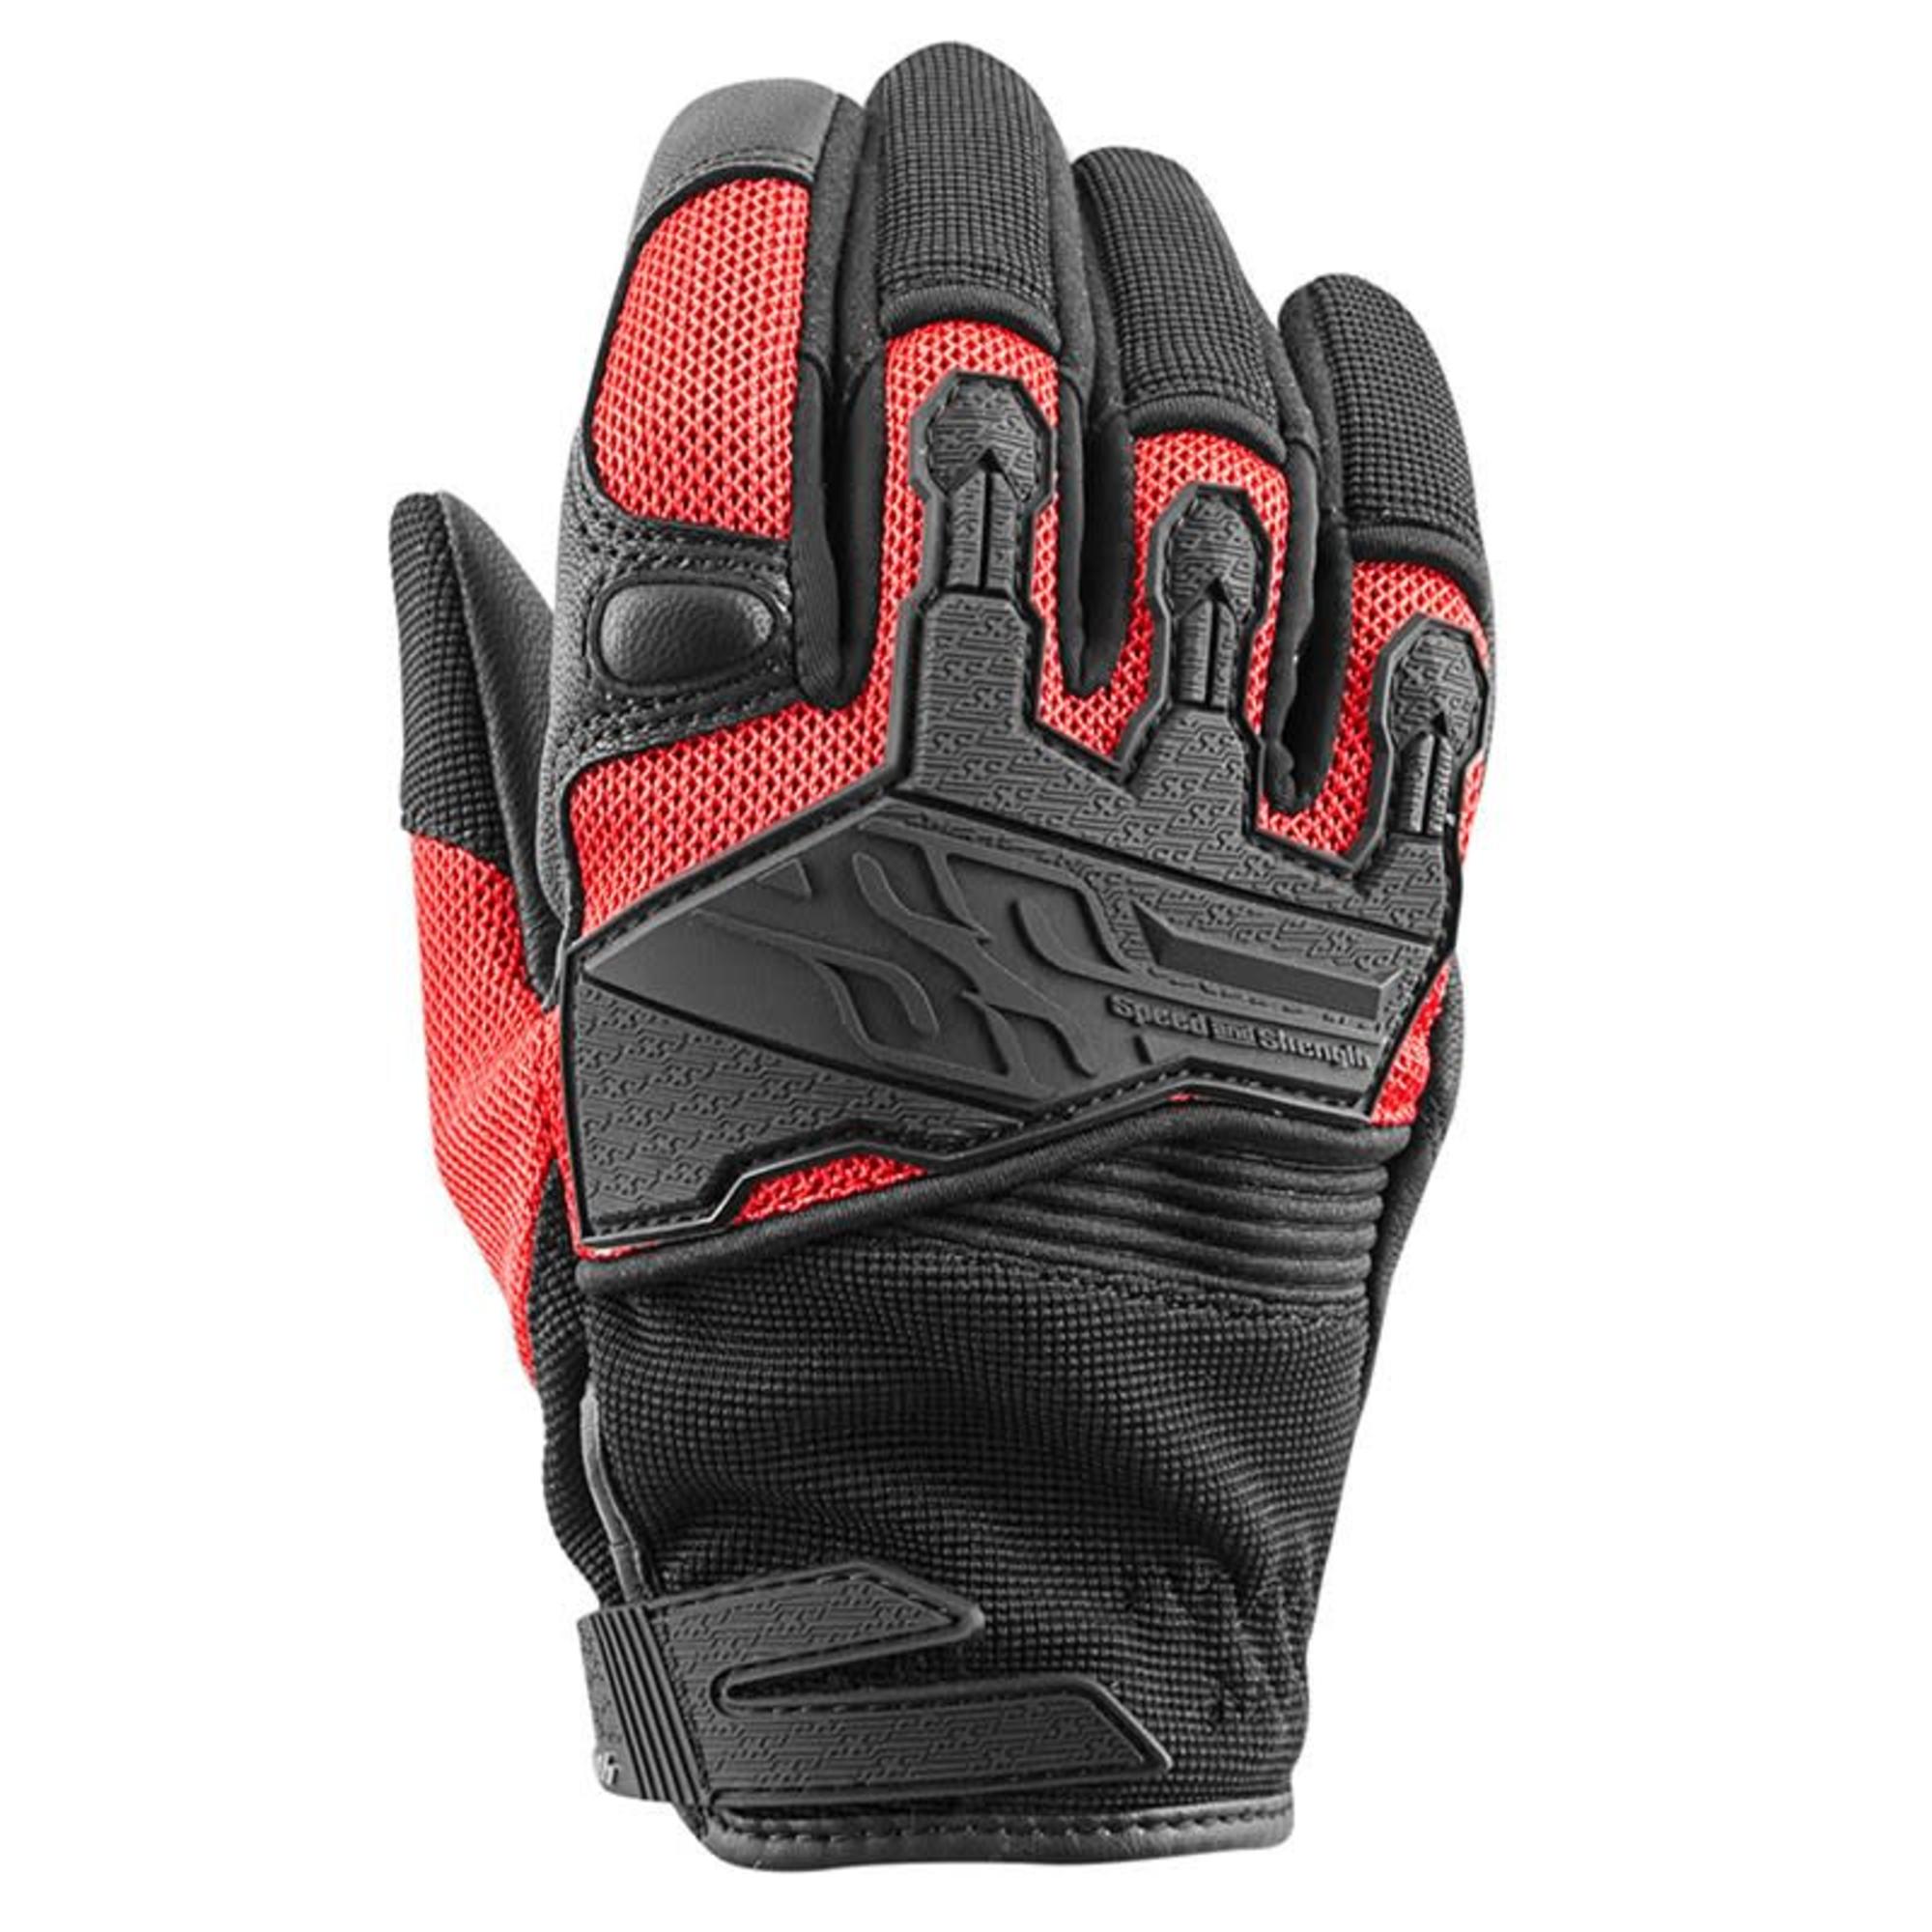 speed and strength mesh gloves for womens backlash